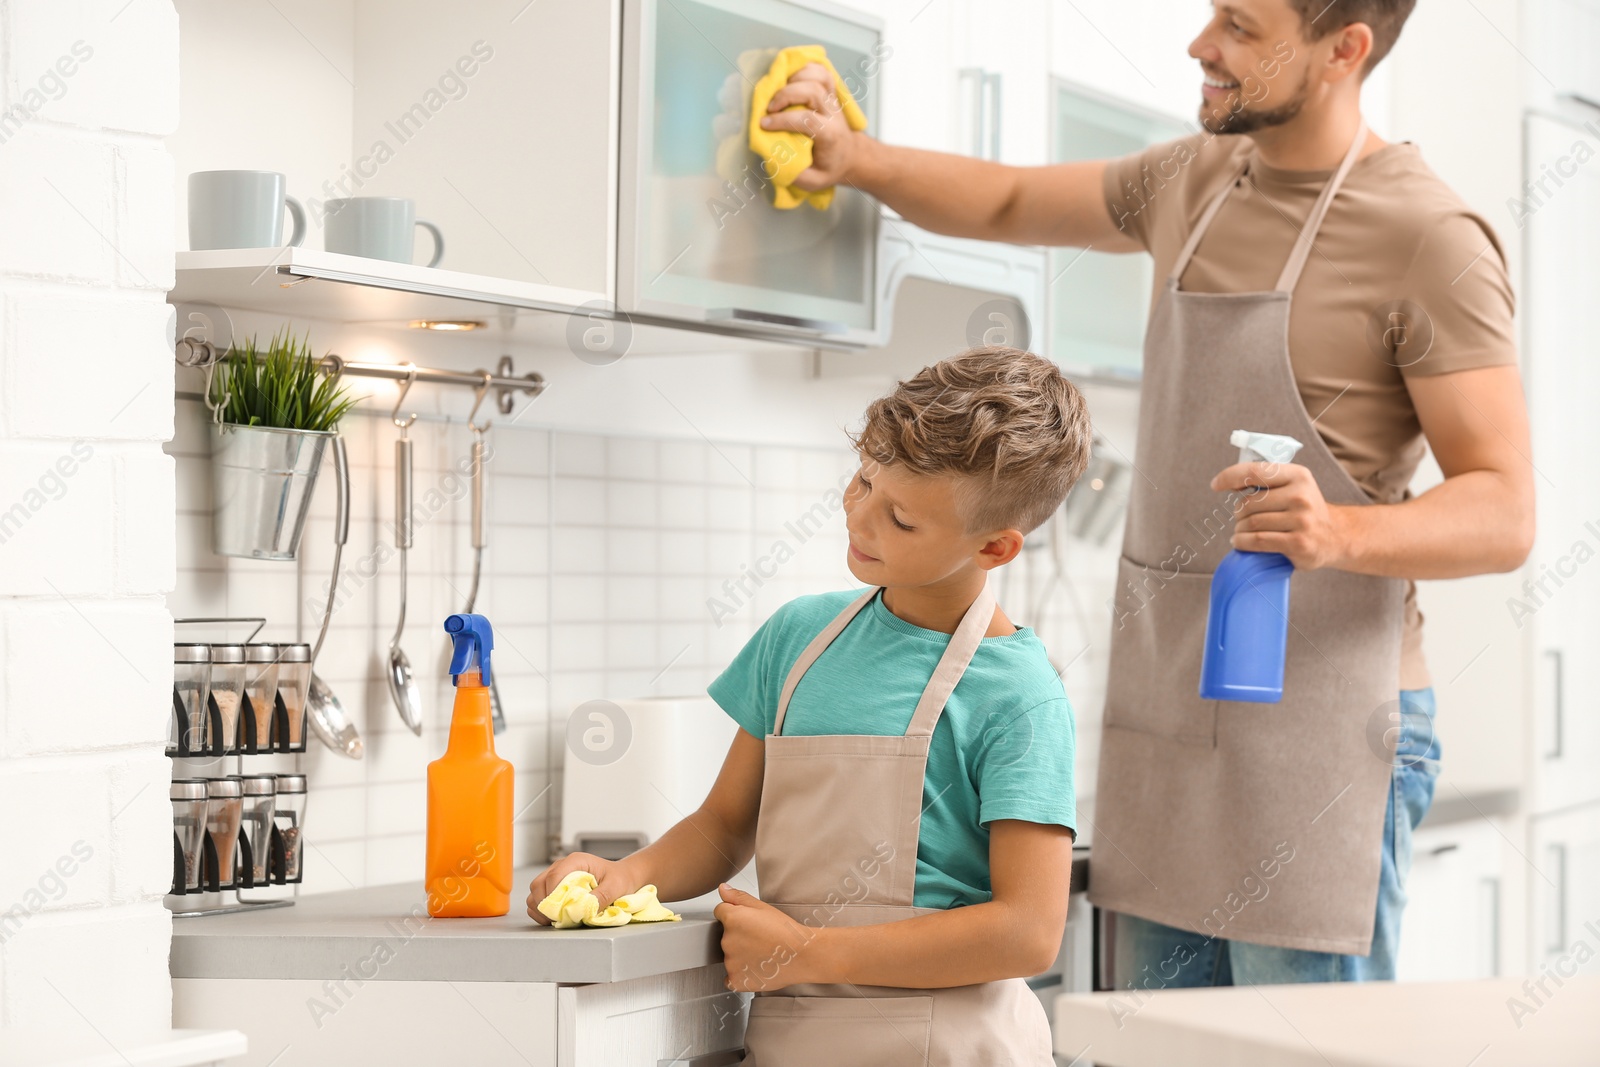 Photo of Dad and son cleaning in kitchen together